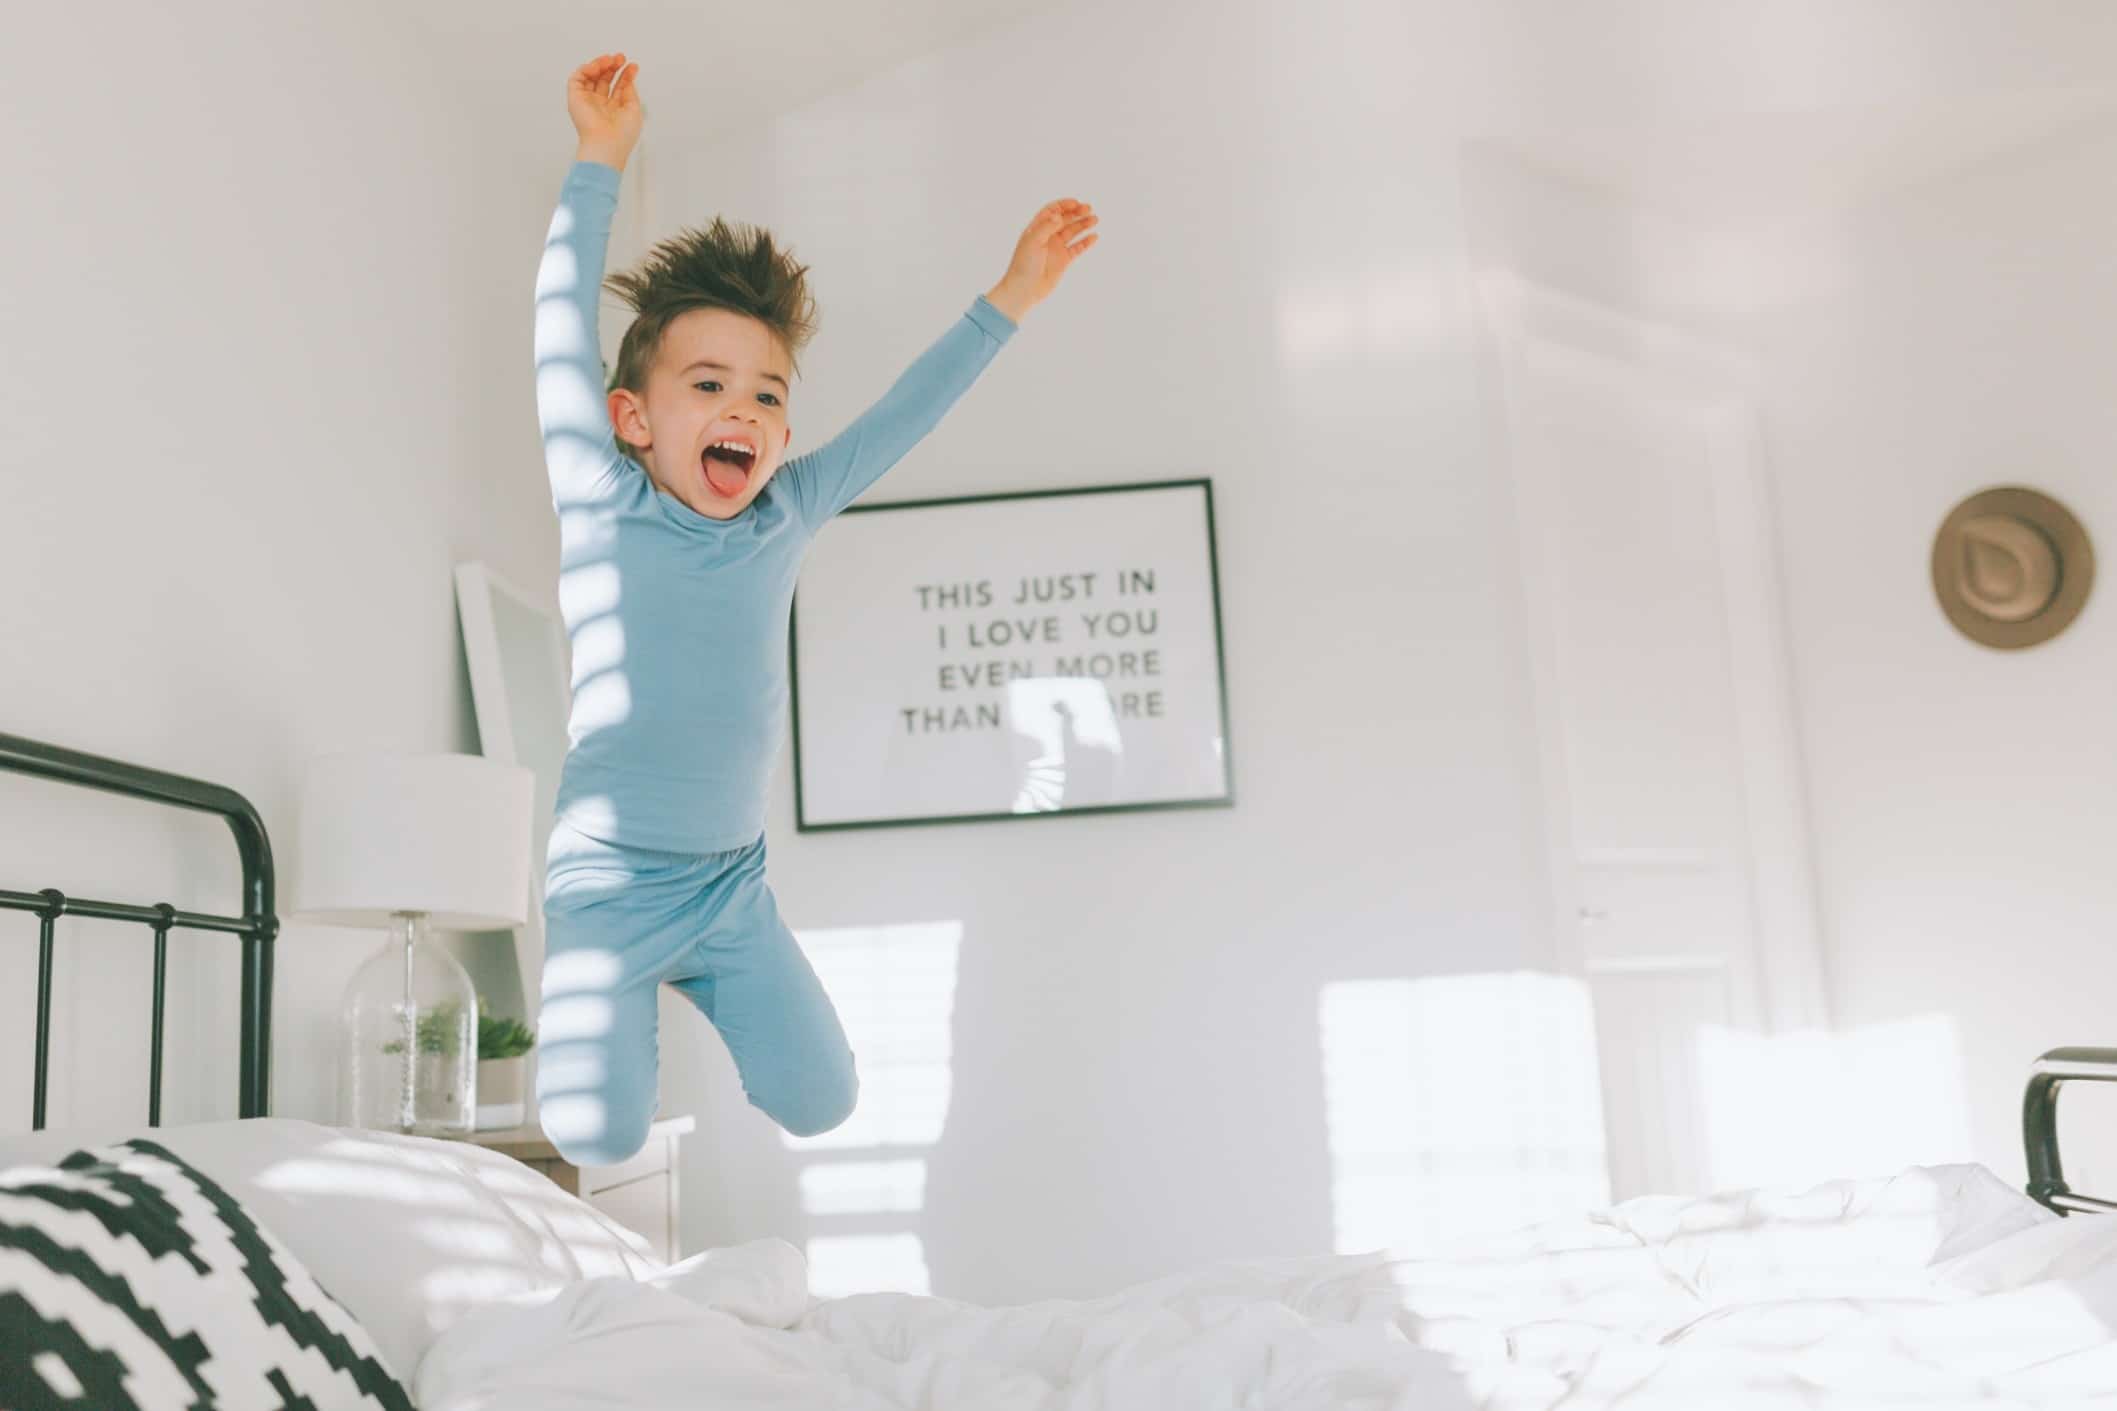 little boy jumping on the bed